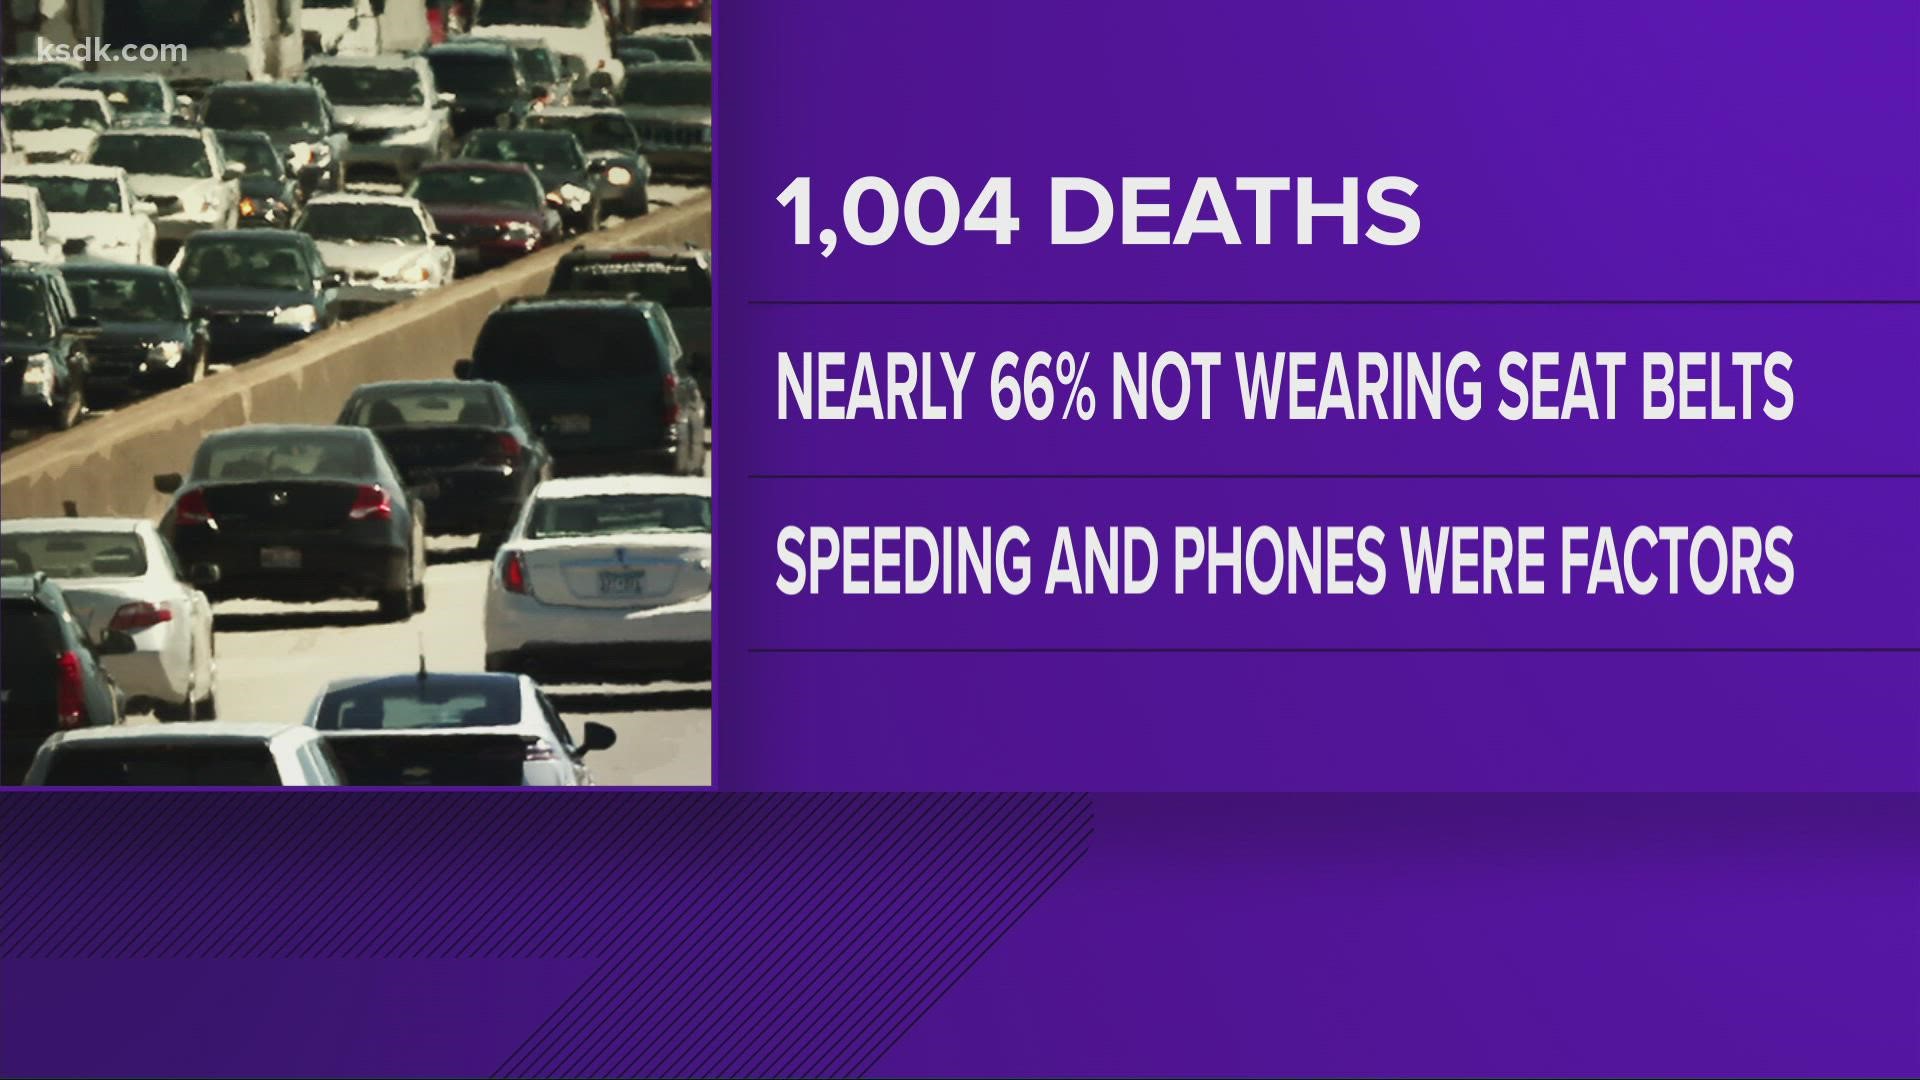 Lack of seat belts, cell phone use while driving and speeding were significant factors in the deaths, the Missouri Department of Transportation said.